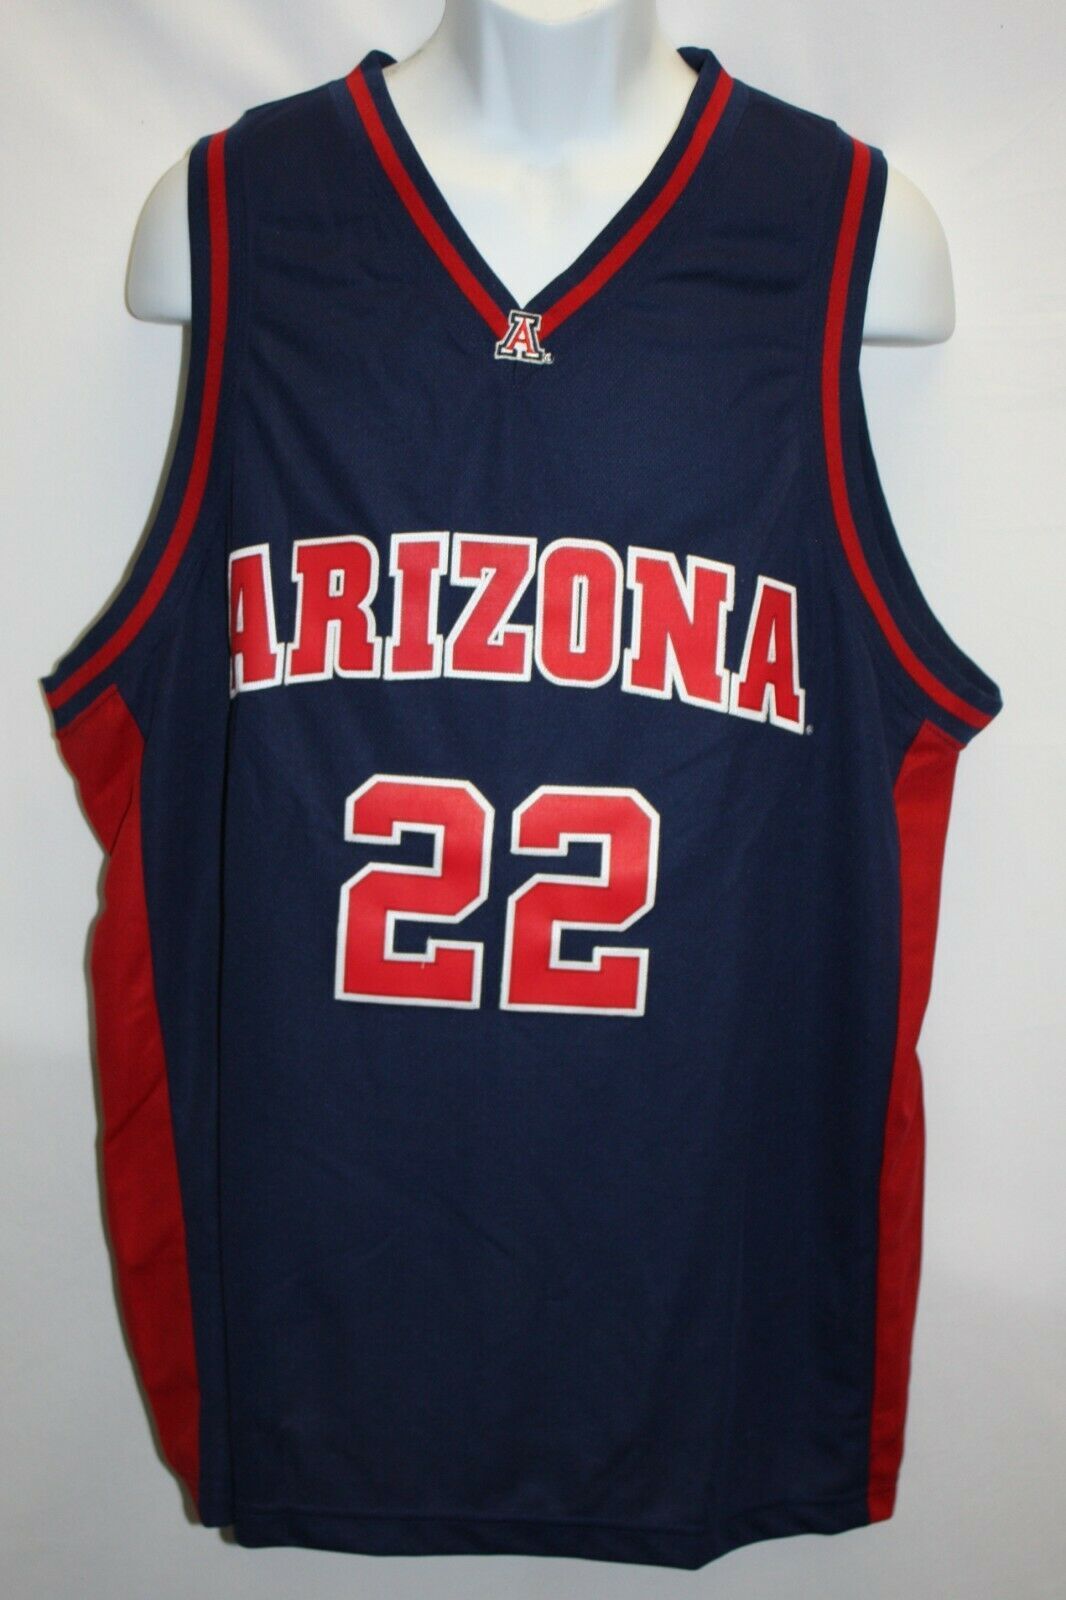 Primary image for Vintage Footlocker NCAA Arizona Wildcats Stitched Basketball Jersey #22 Sz XL